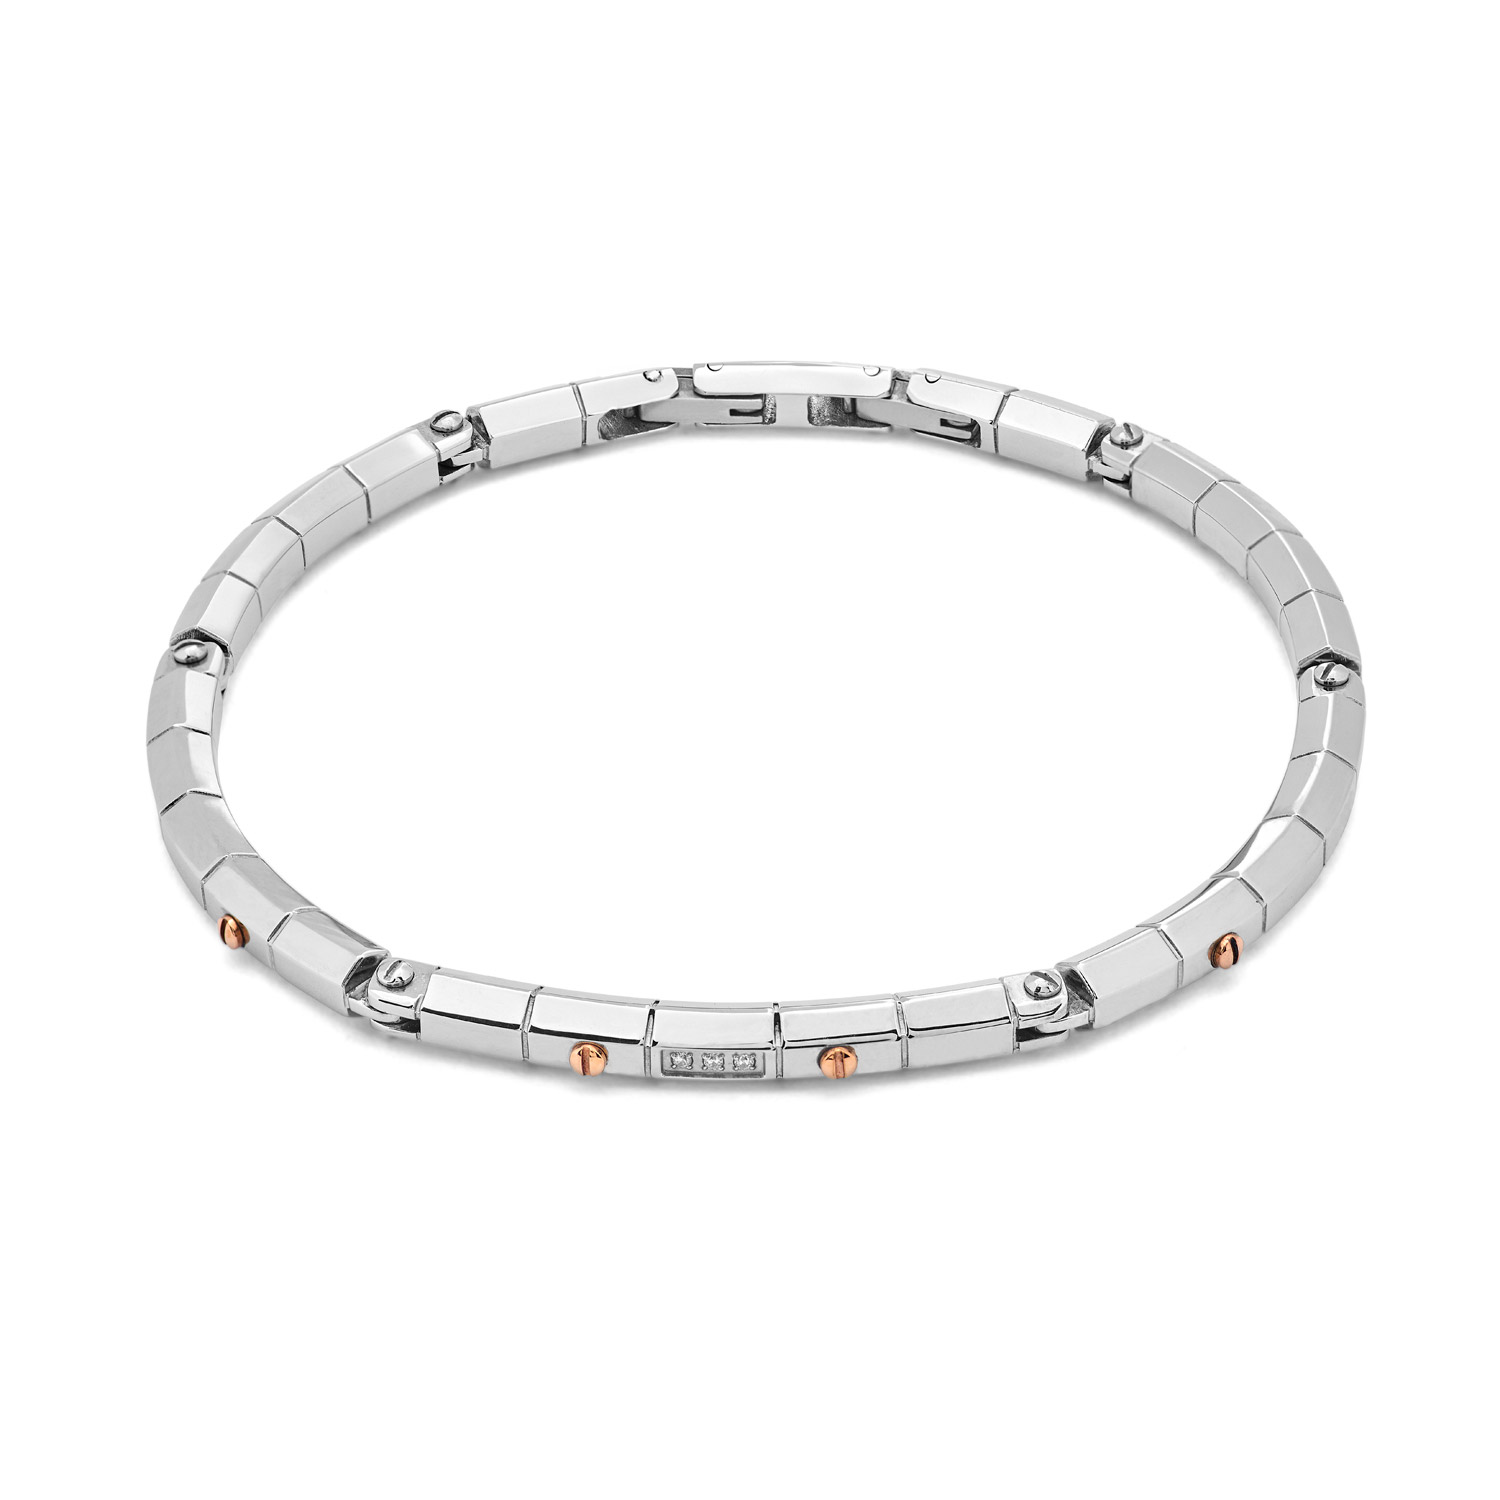 Comete Gioielli Men's Snake Bracelet in Silver and Gold with Zircons